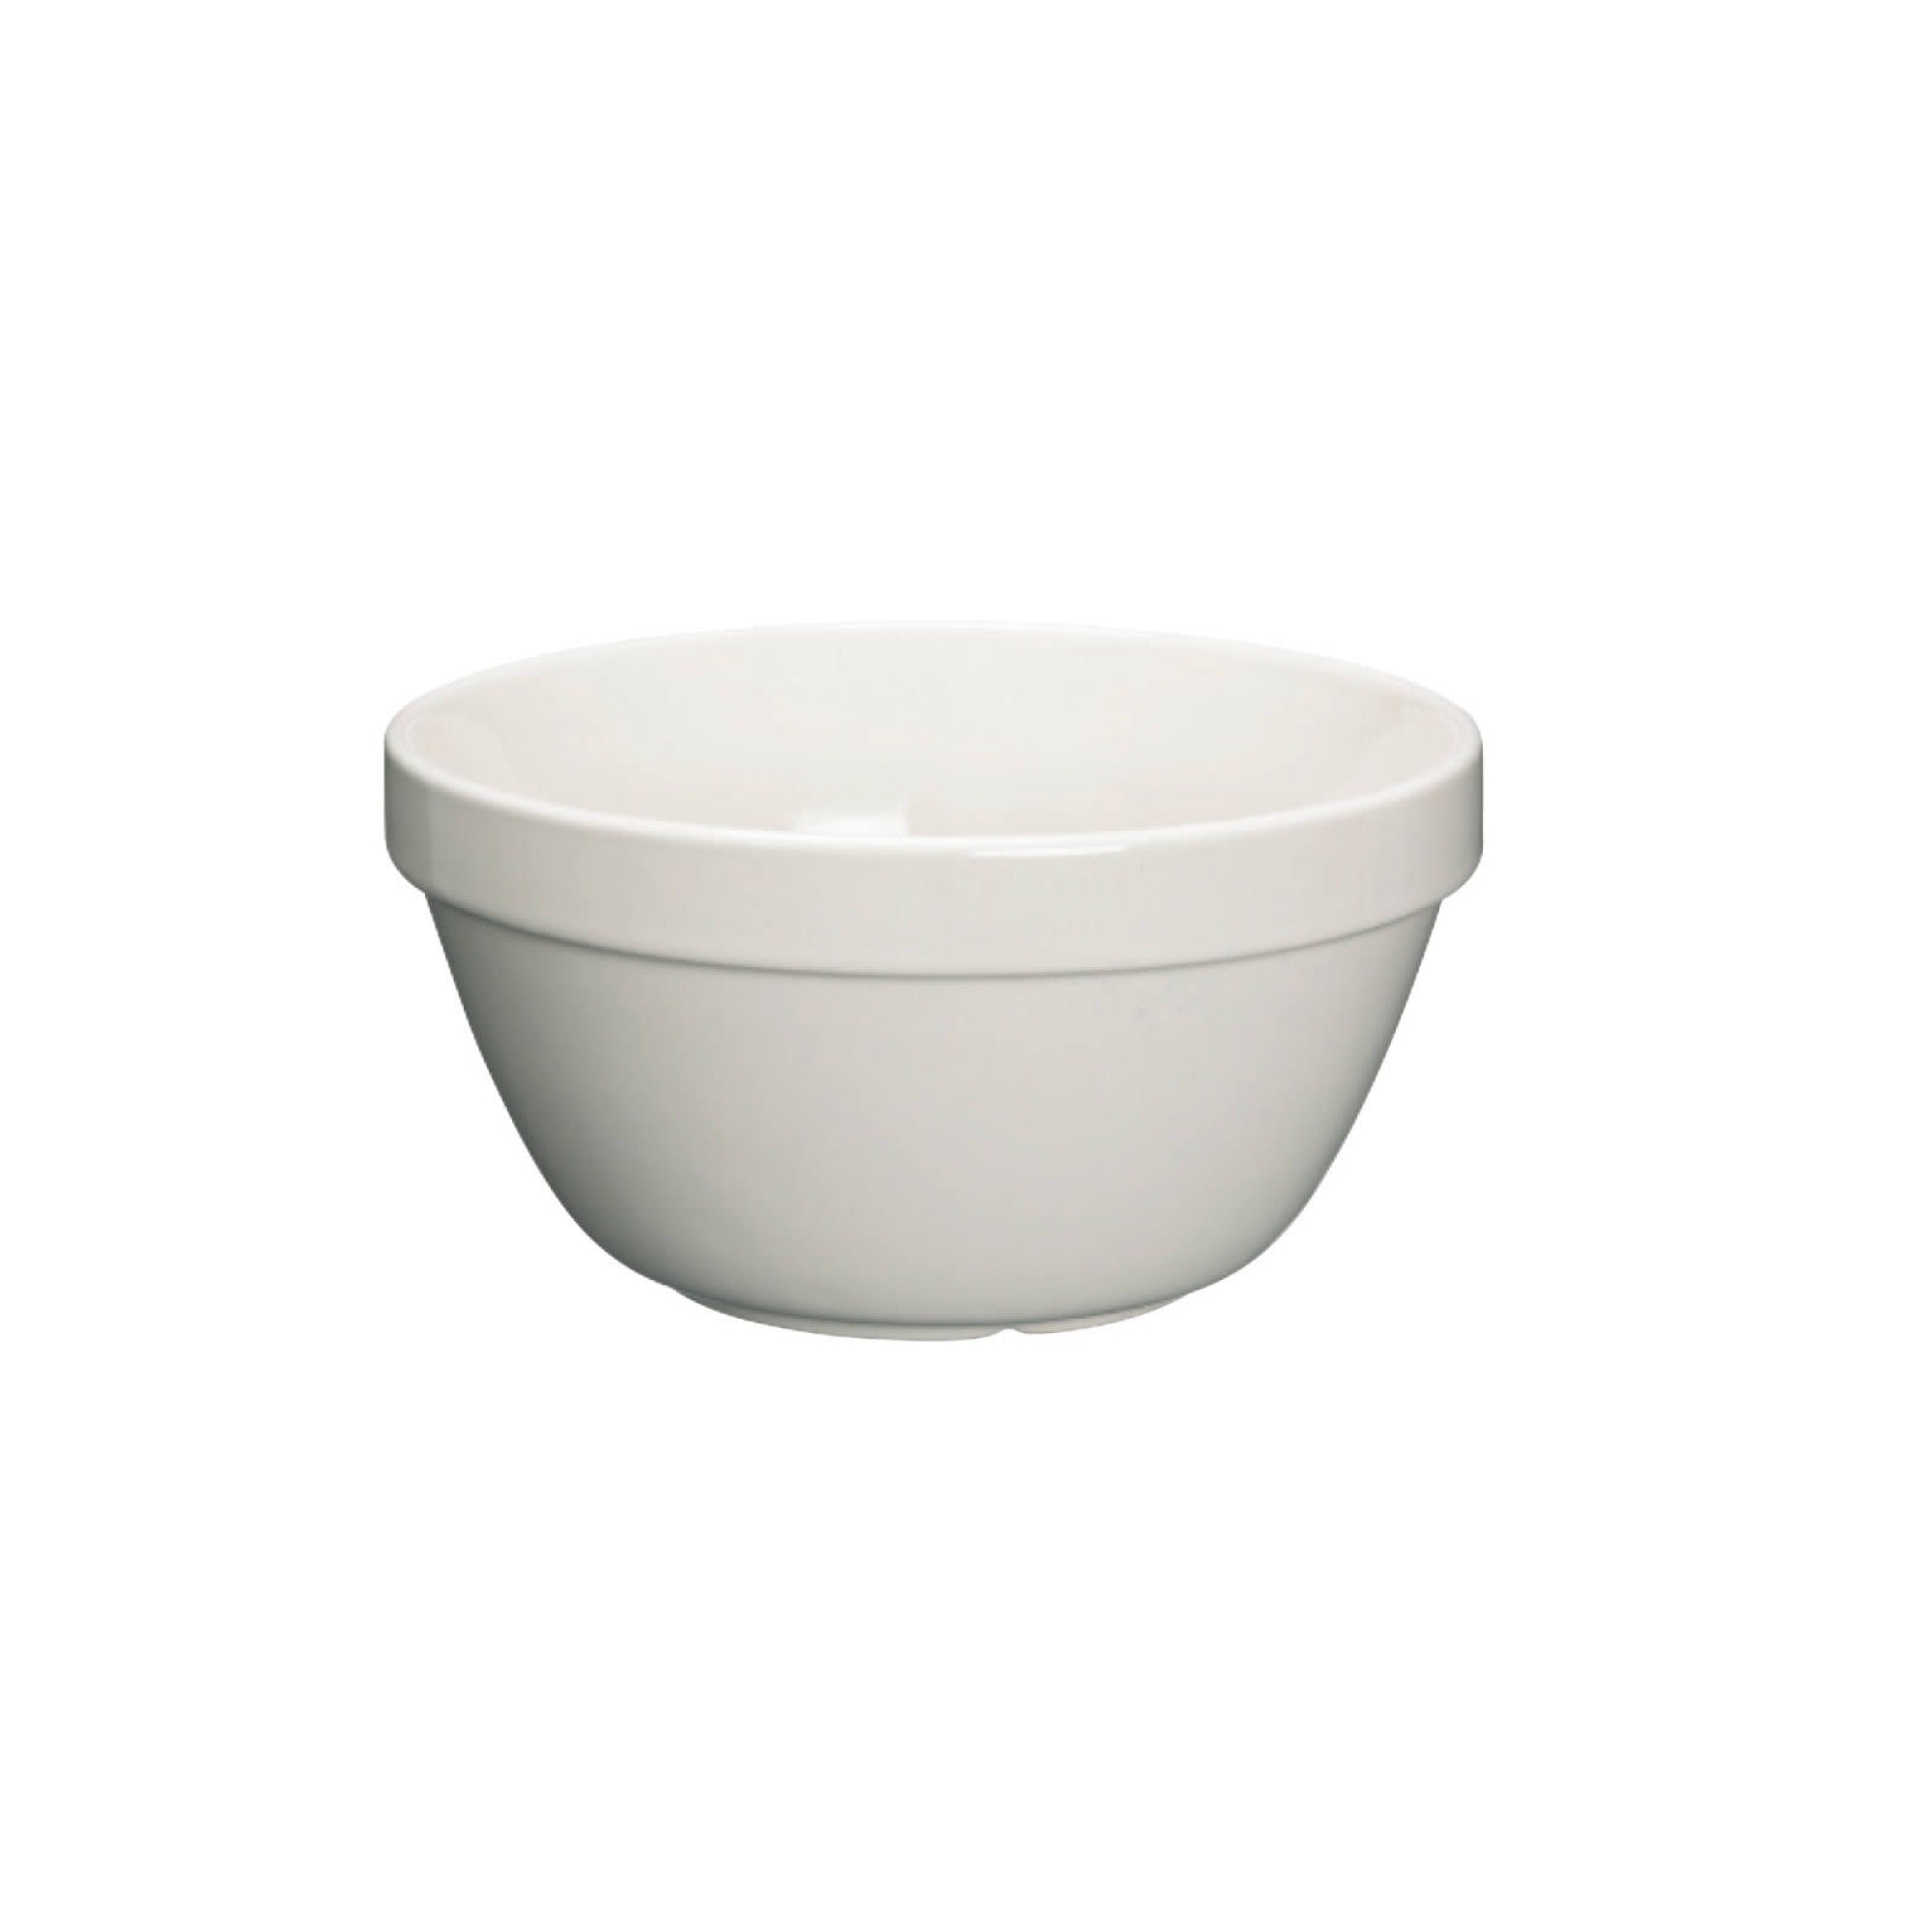 Home Made Traditional Stoneware 600ml Pudding Basin - The Cooks Cupboard Ltd